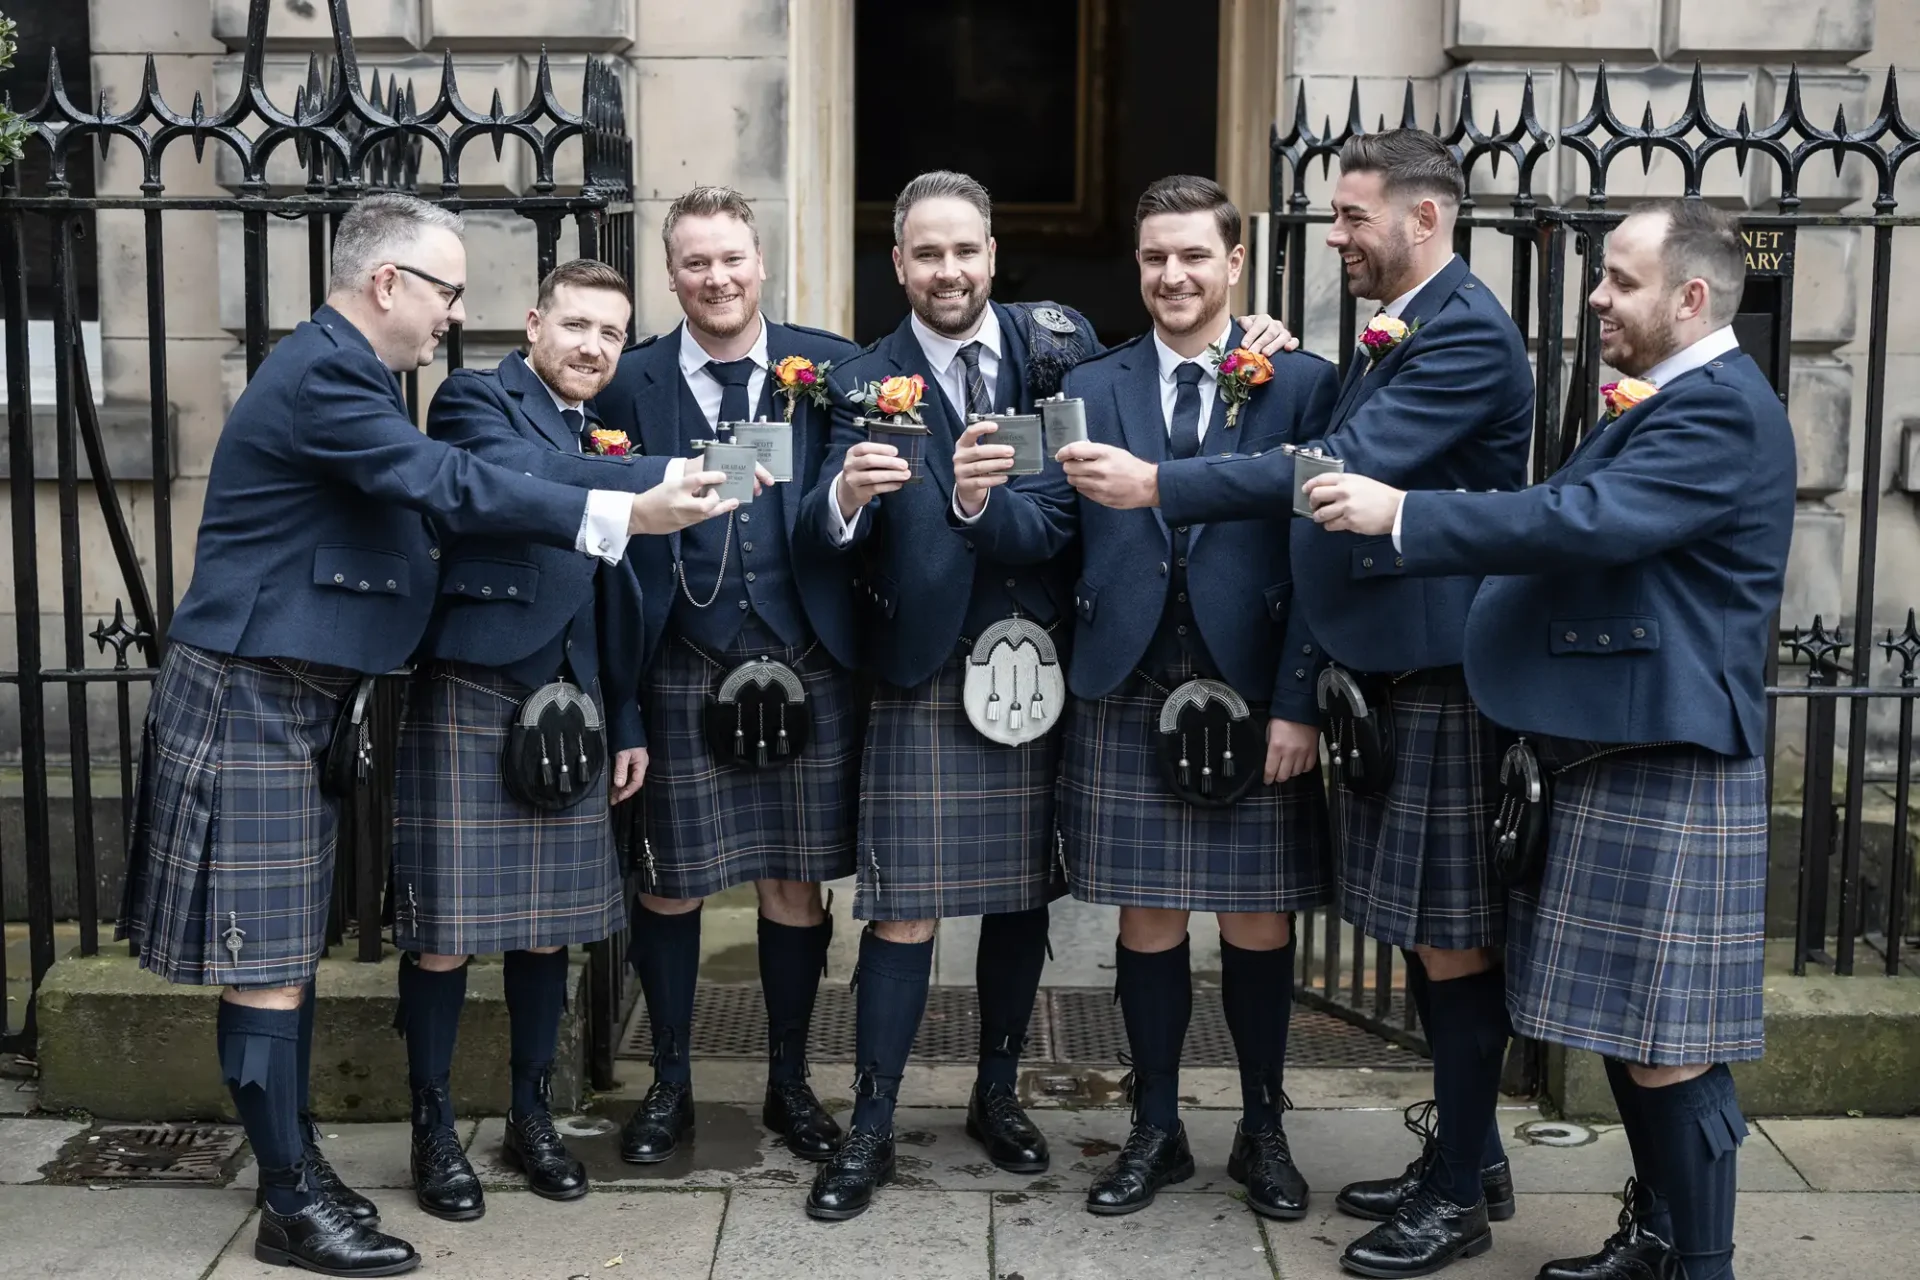 Six men in matching tartan kilts and jackets, toasting with drinks, celebrating outdoors near a building with iron fences.